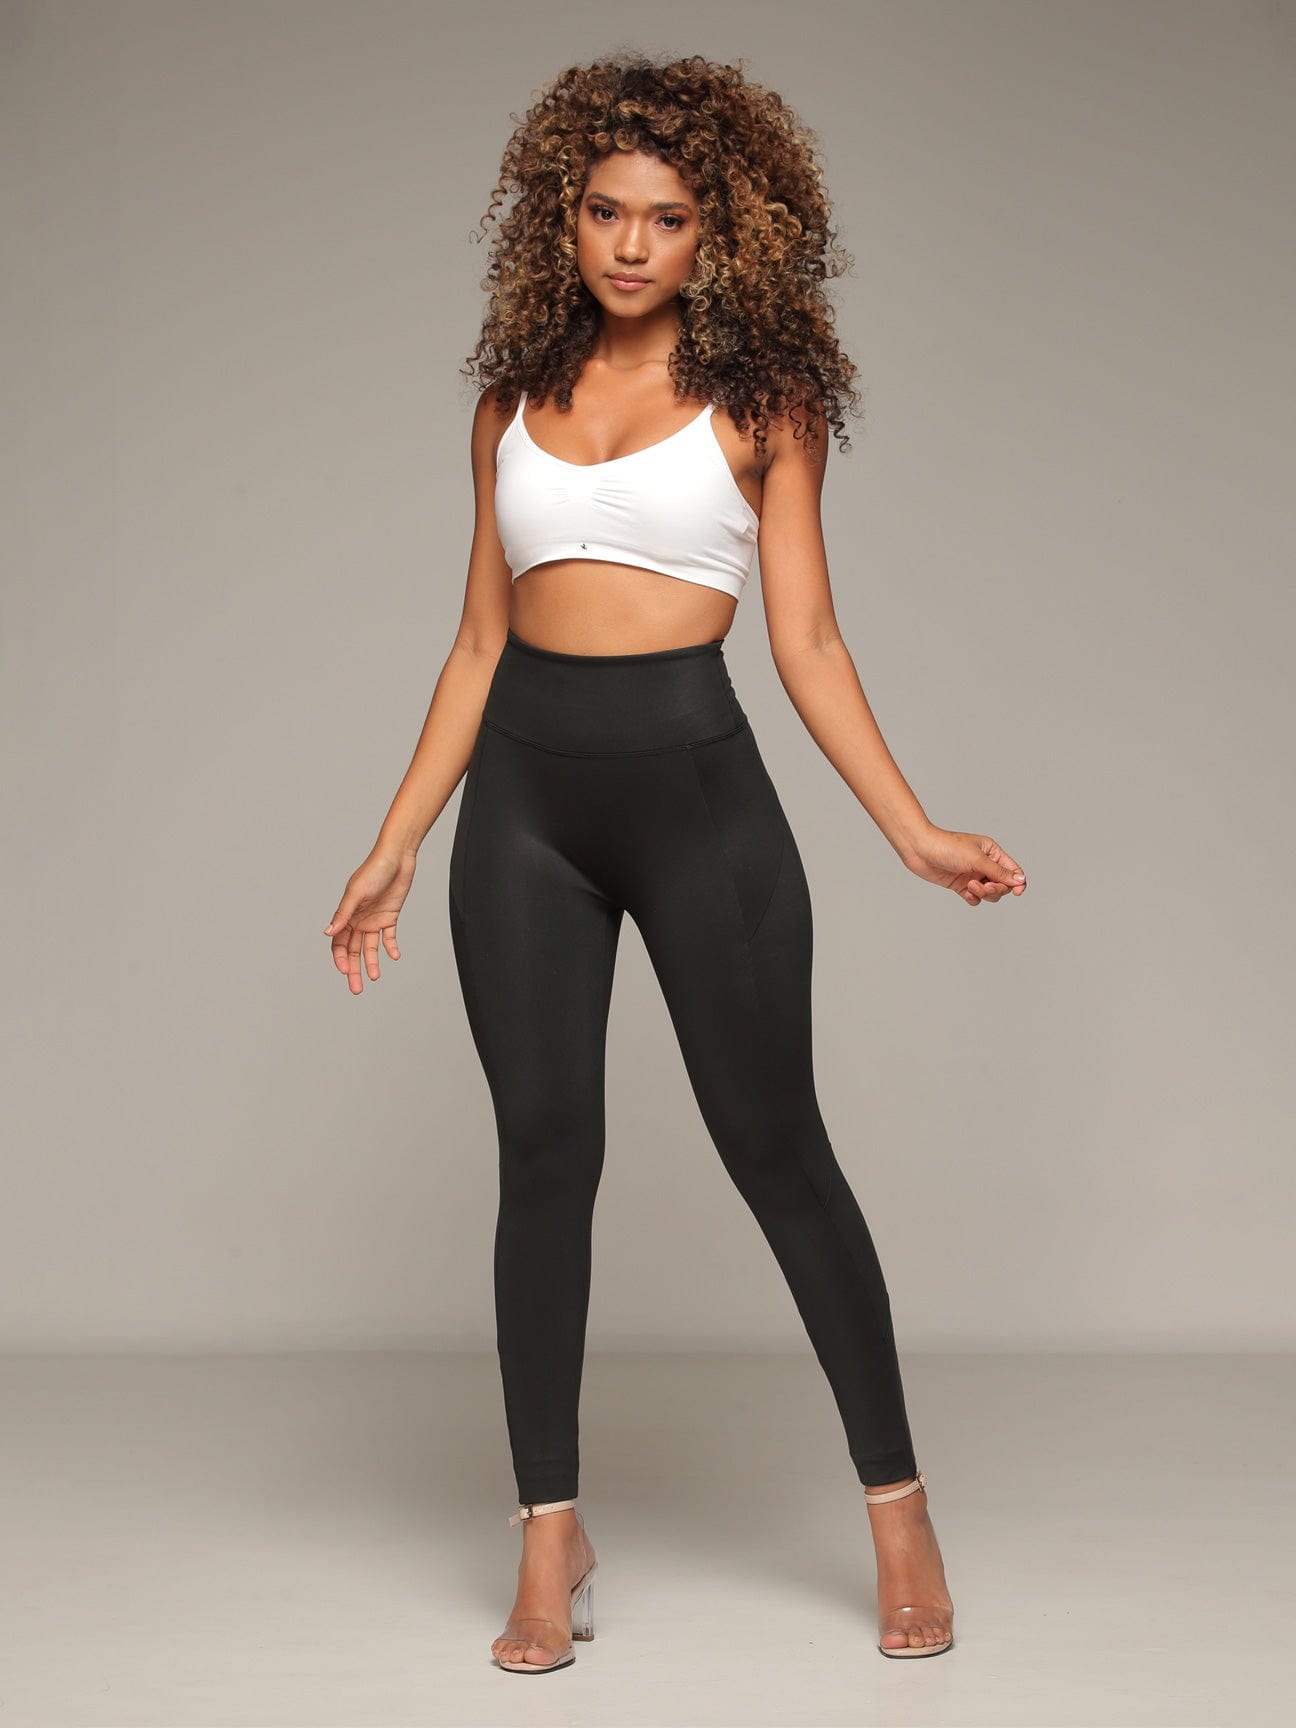 Business Butt Lift Leggings with Tummy Control 1282